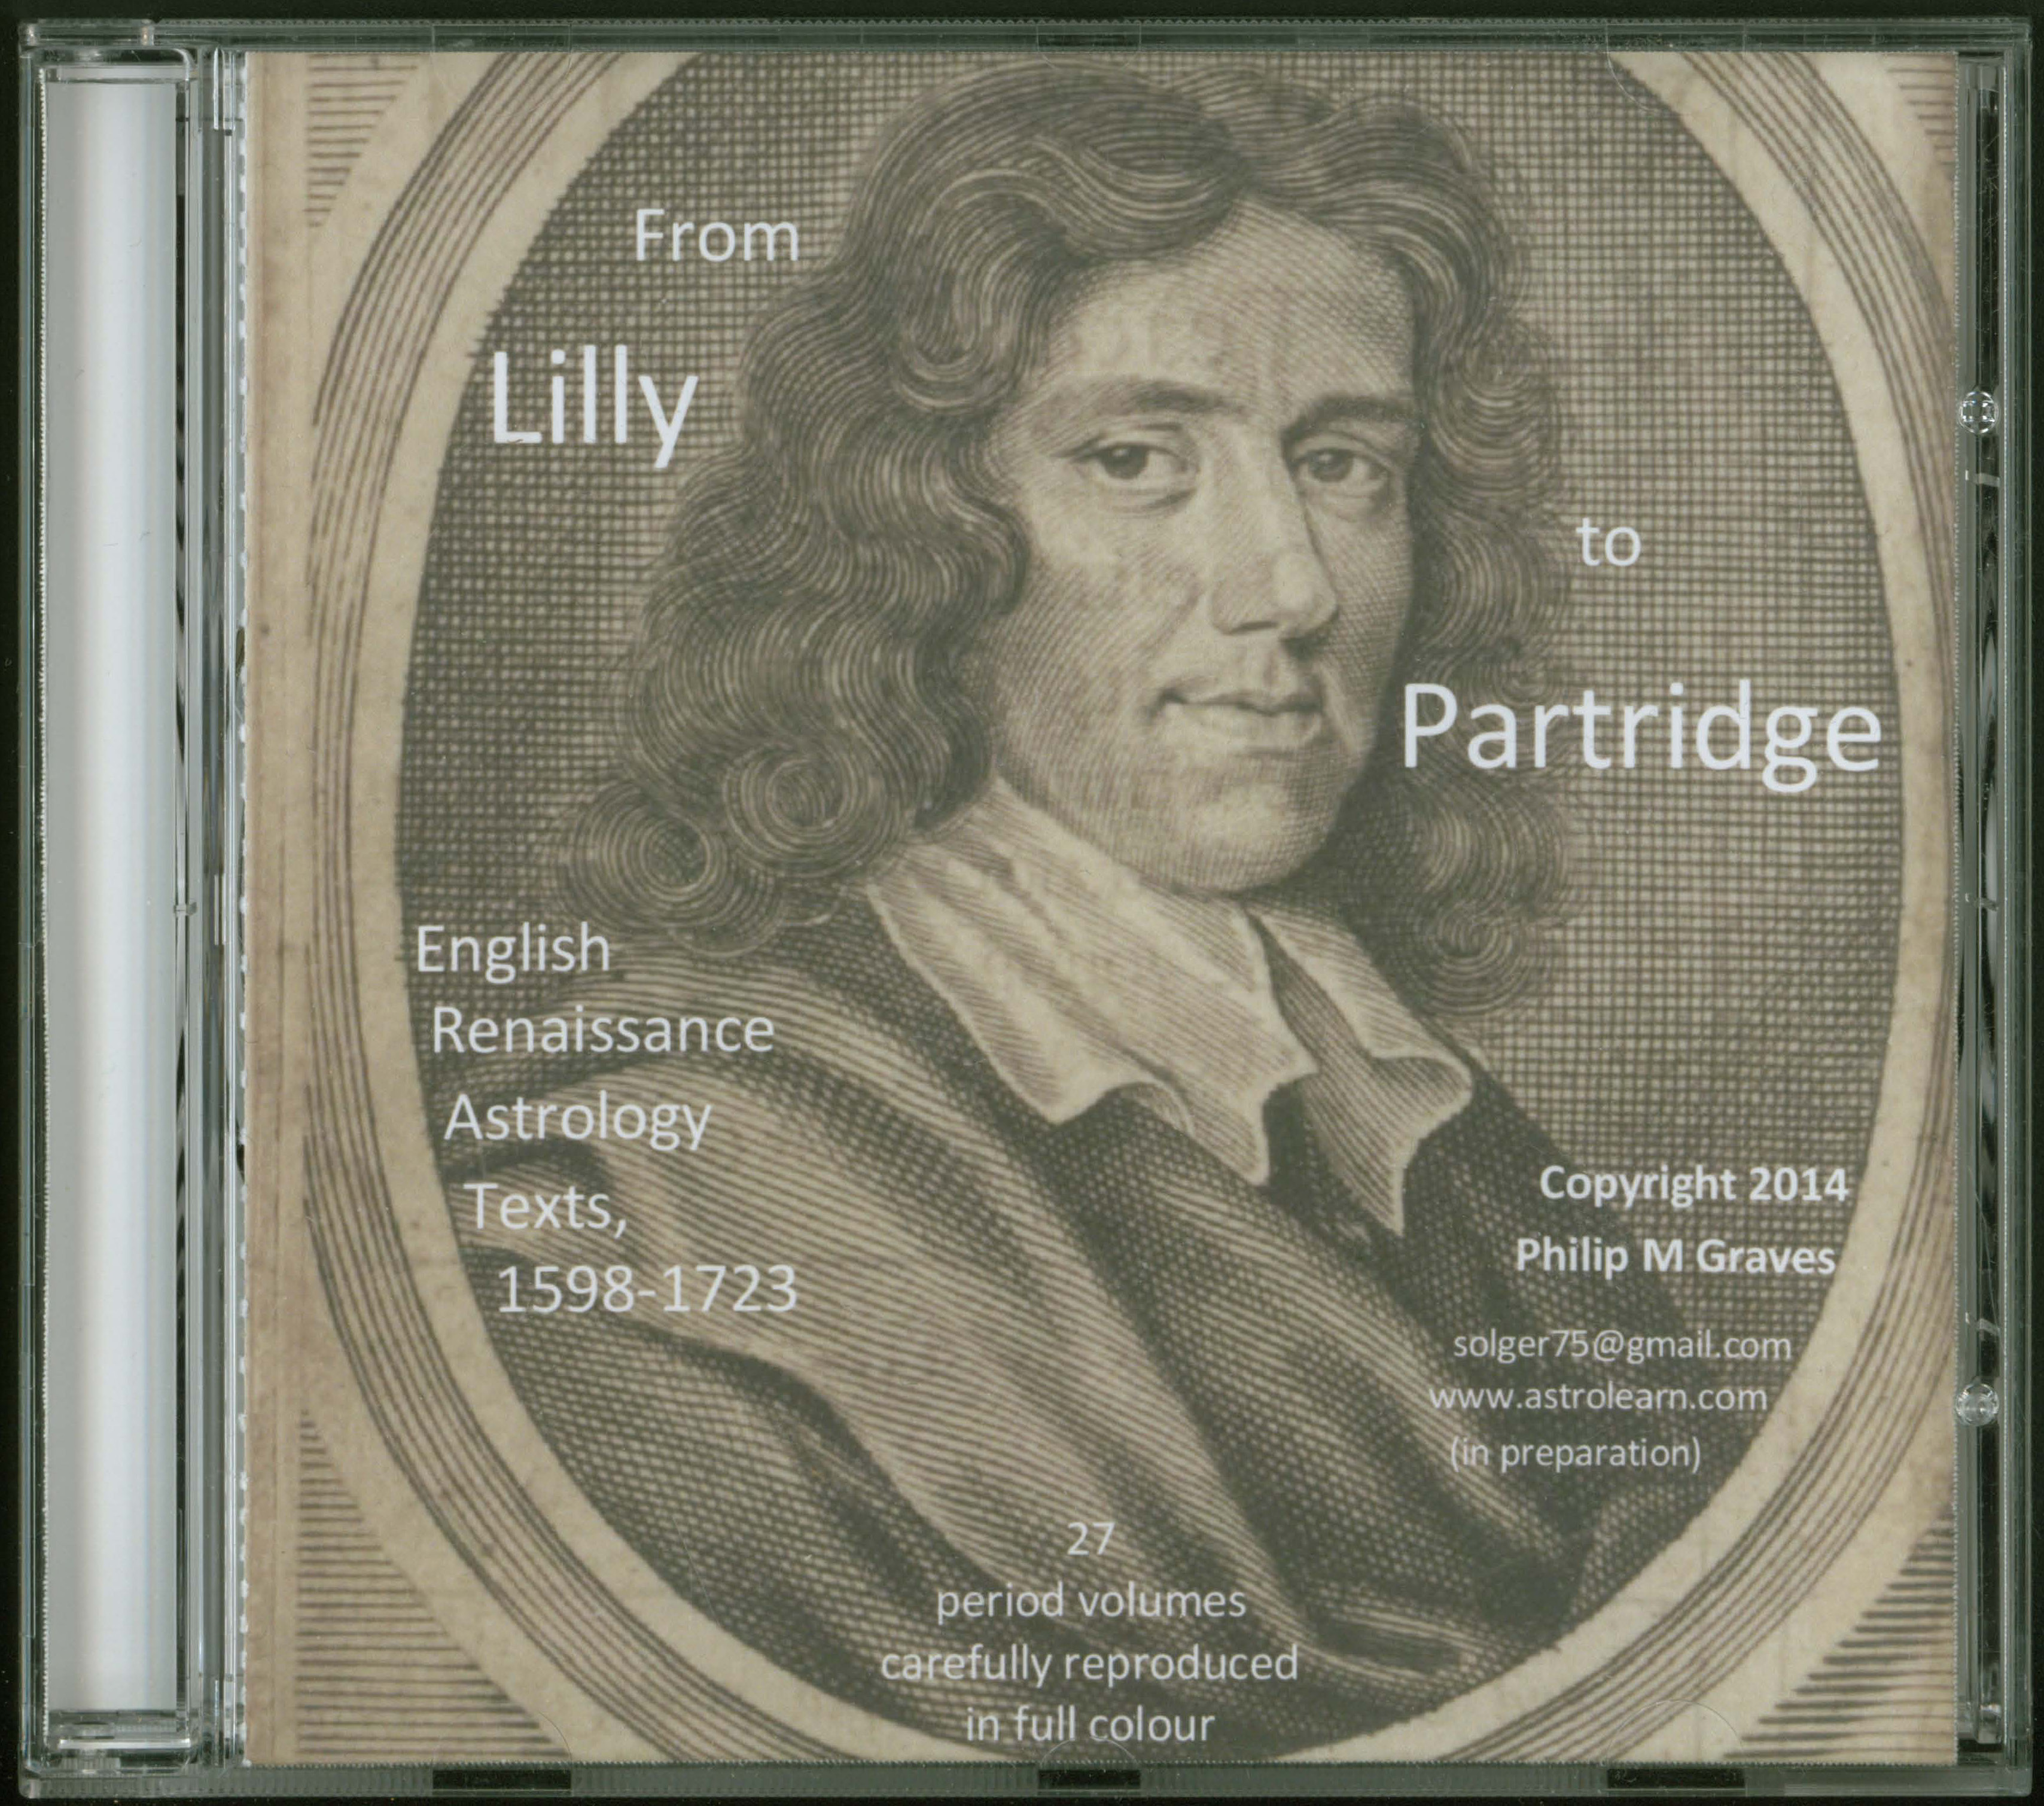 From Lilly to Partridge English Renaissance Astrology Texts DVD Front Cover